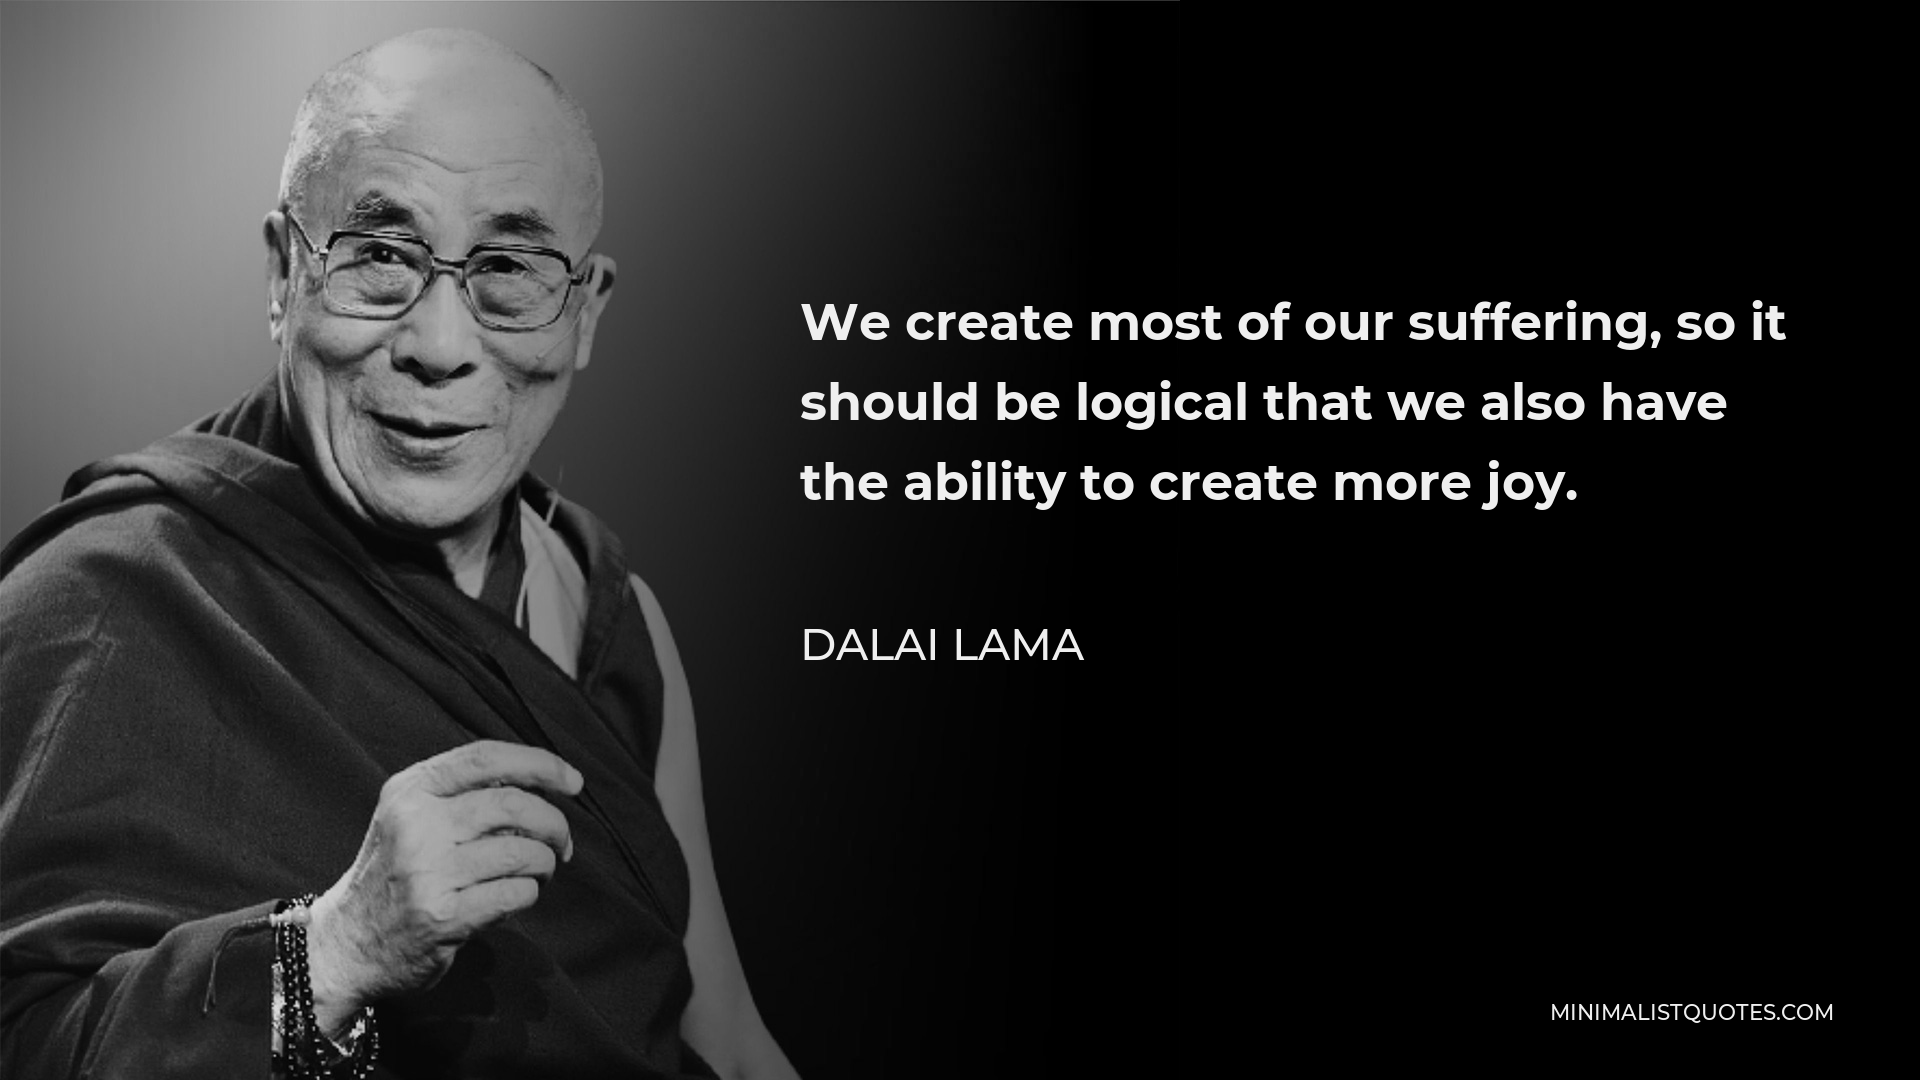 Dalai Lama Quote - We create most of our suffering, so it should be logical that we also have the ability to create more joy.